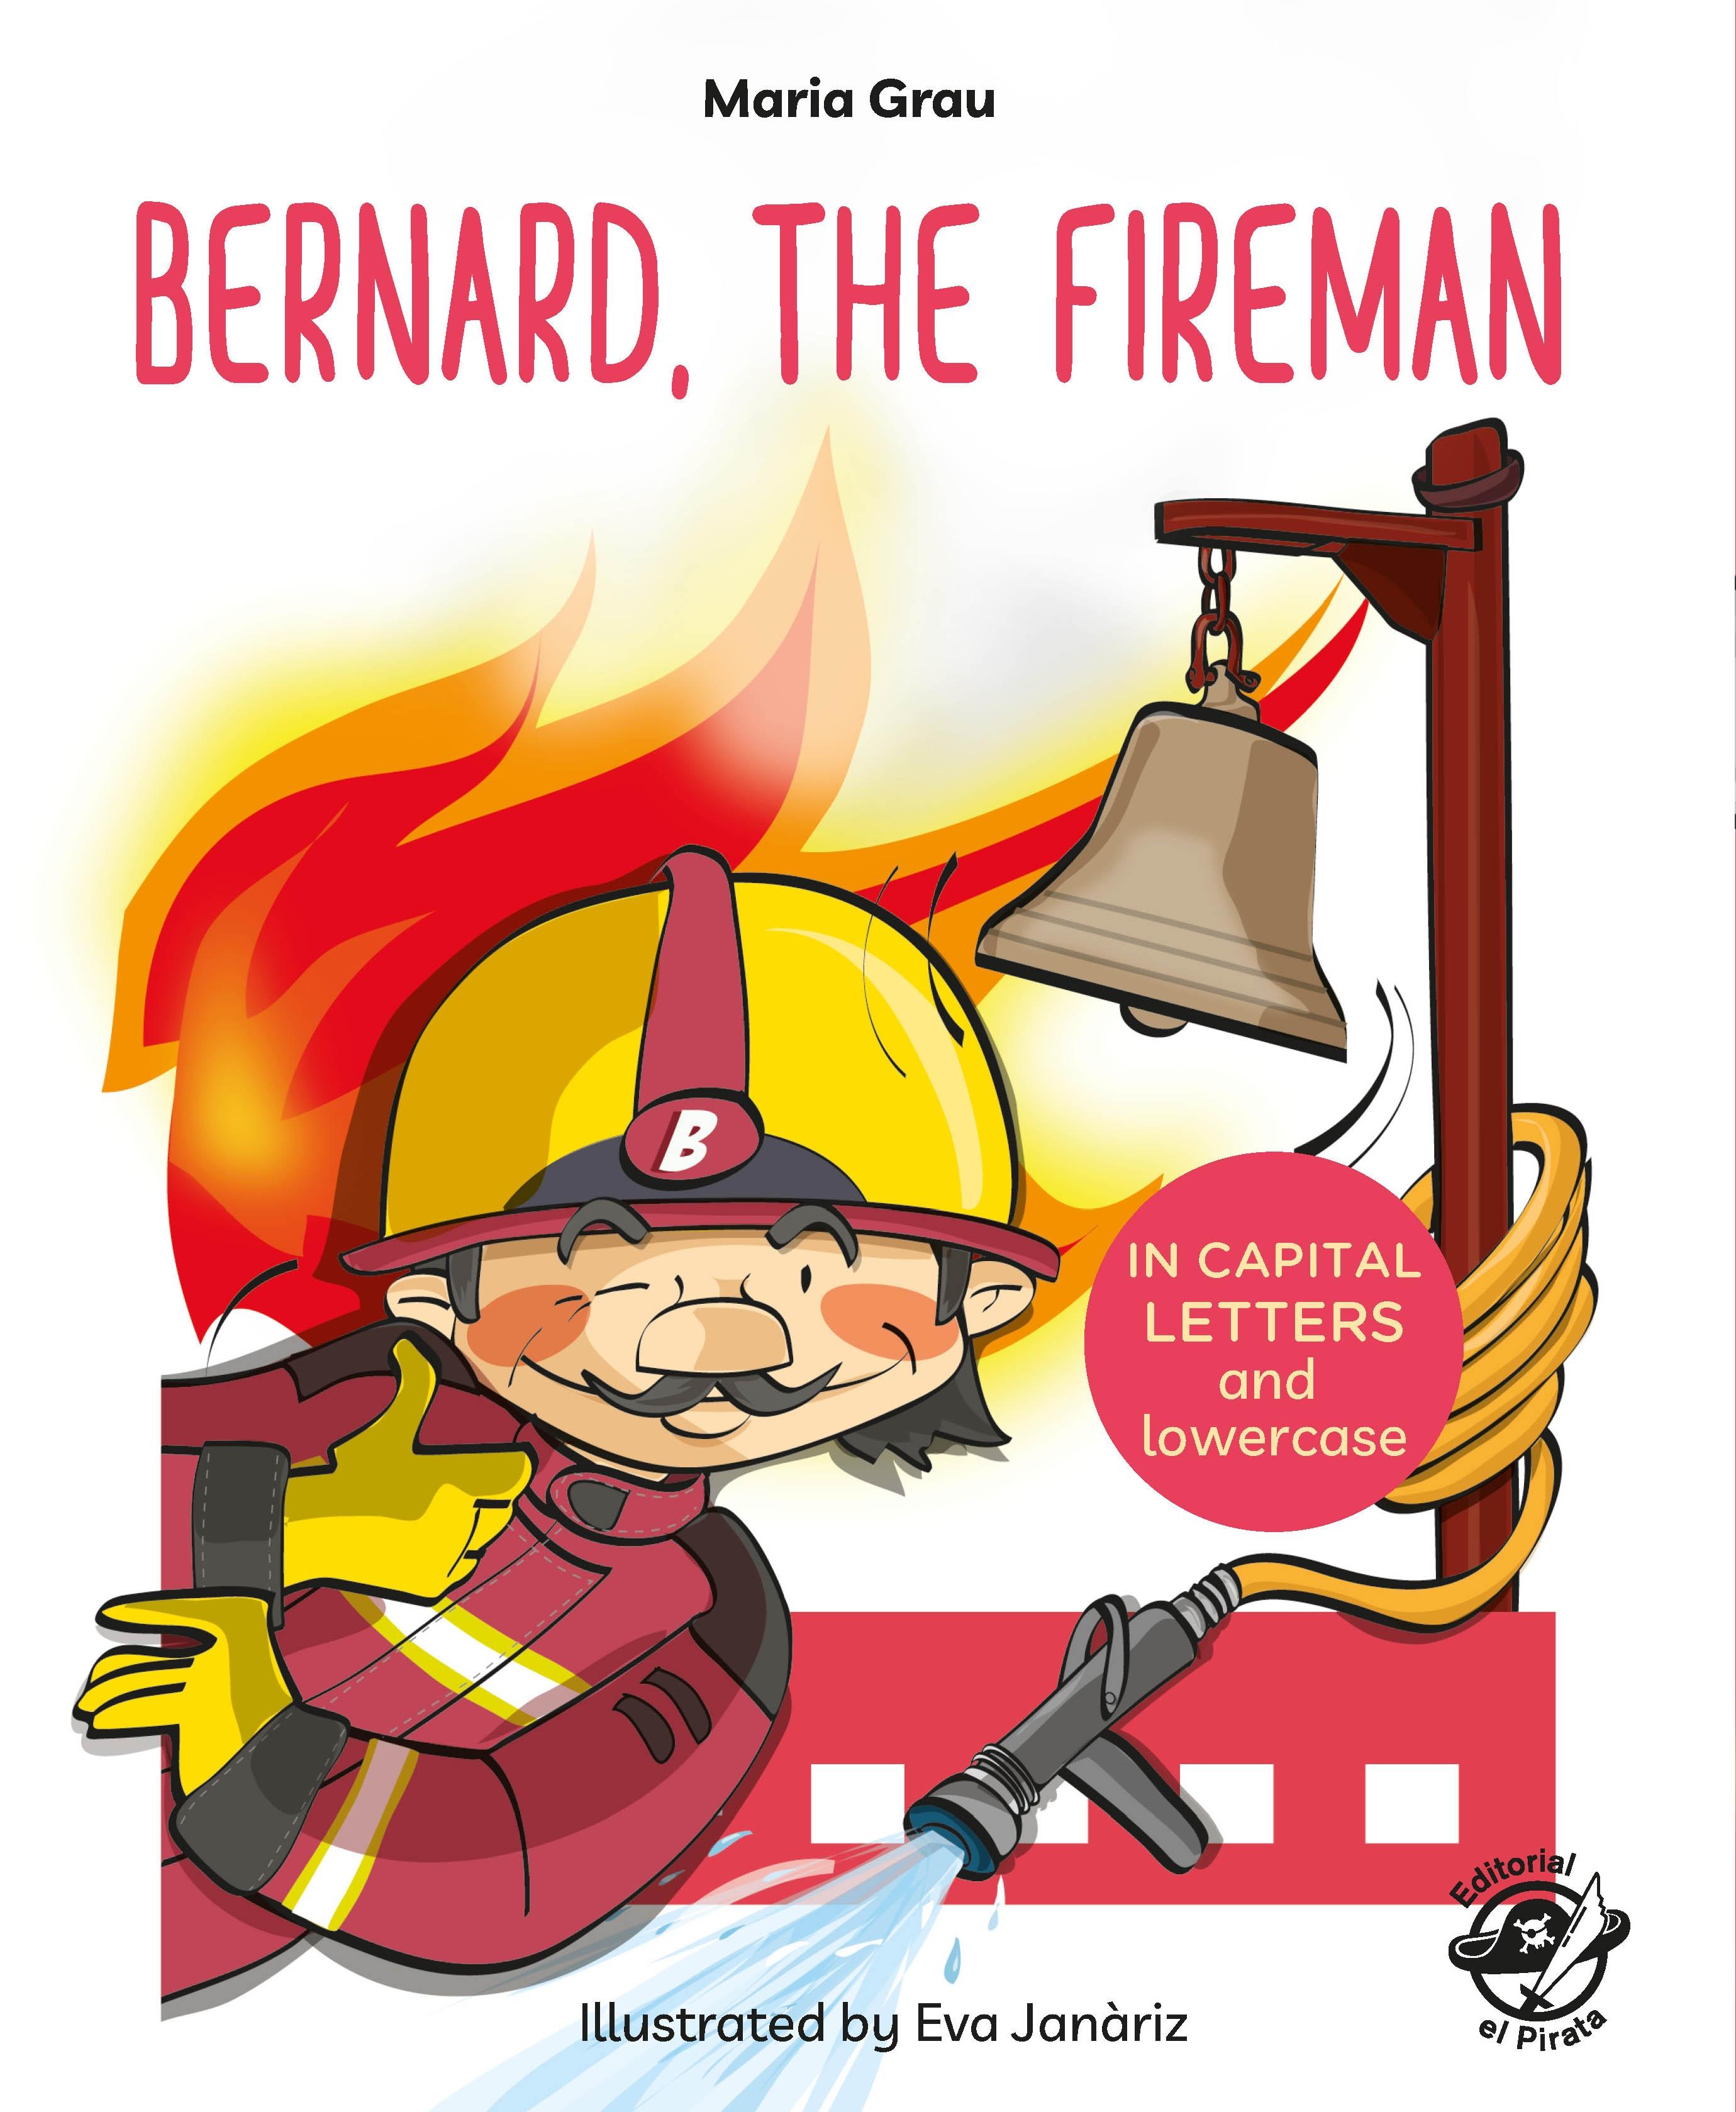 Bernard, the fireman "English Children's Books - Learn to Read in CAPITAL Letters and Lowercas". 